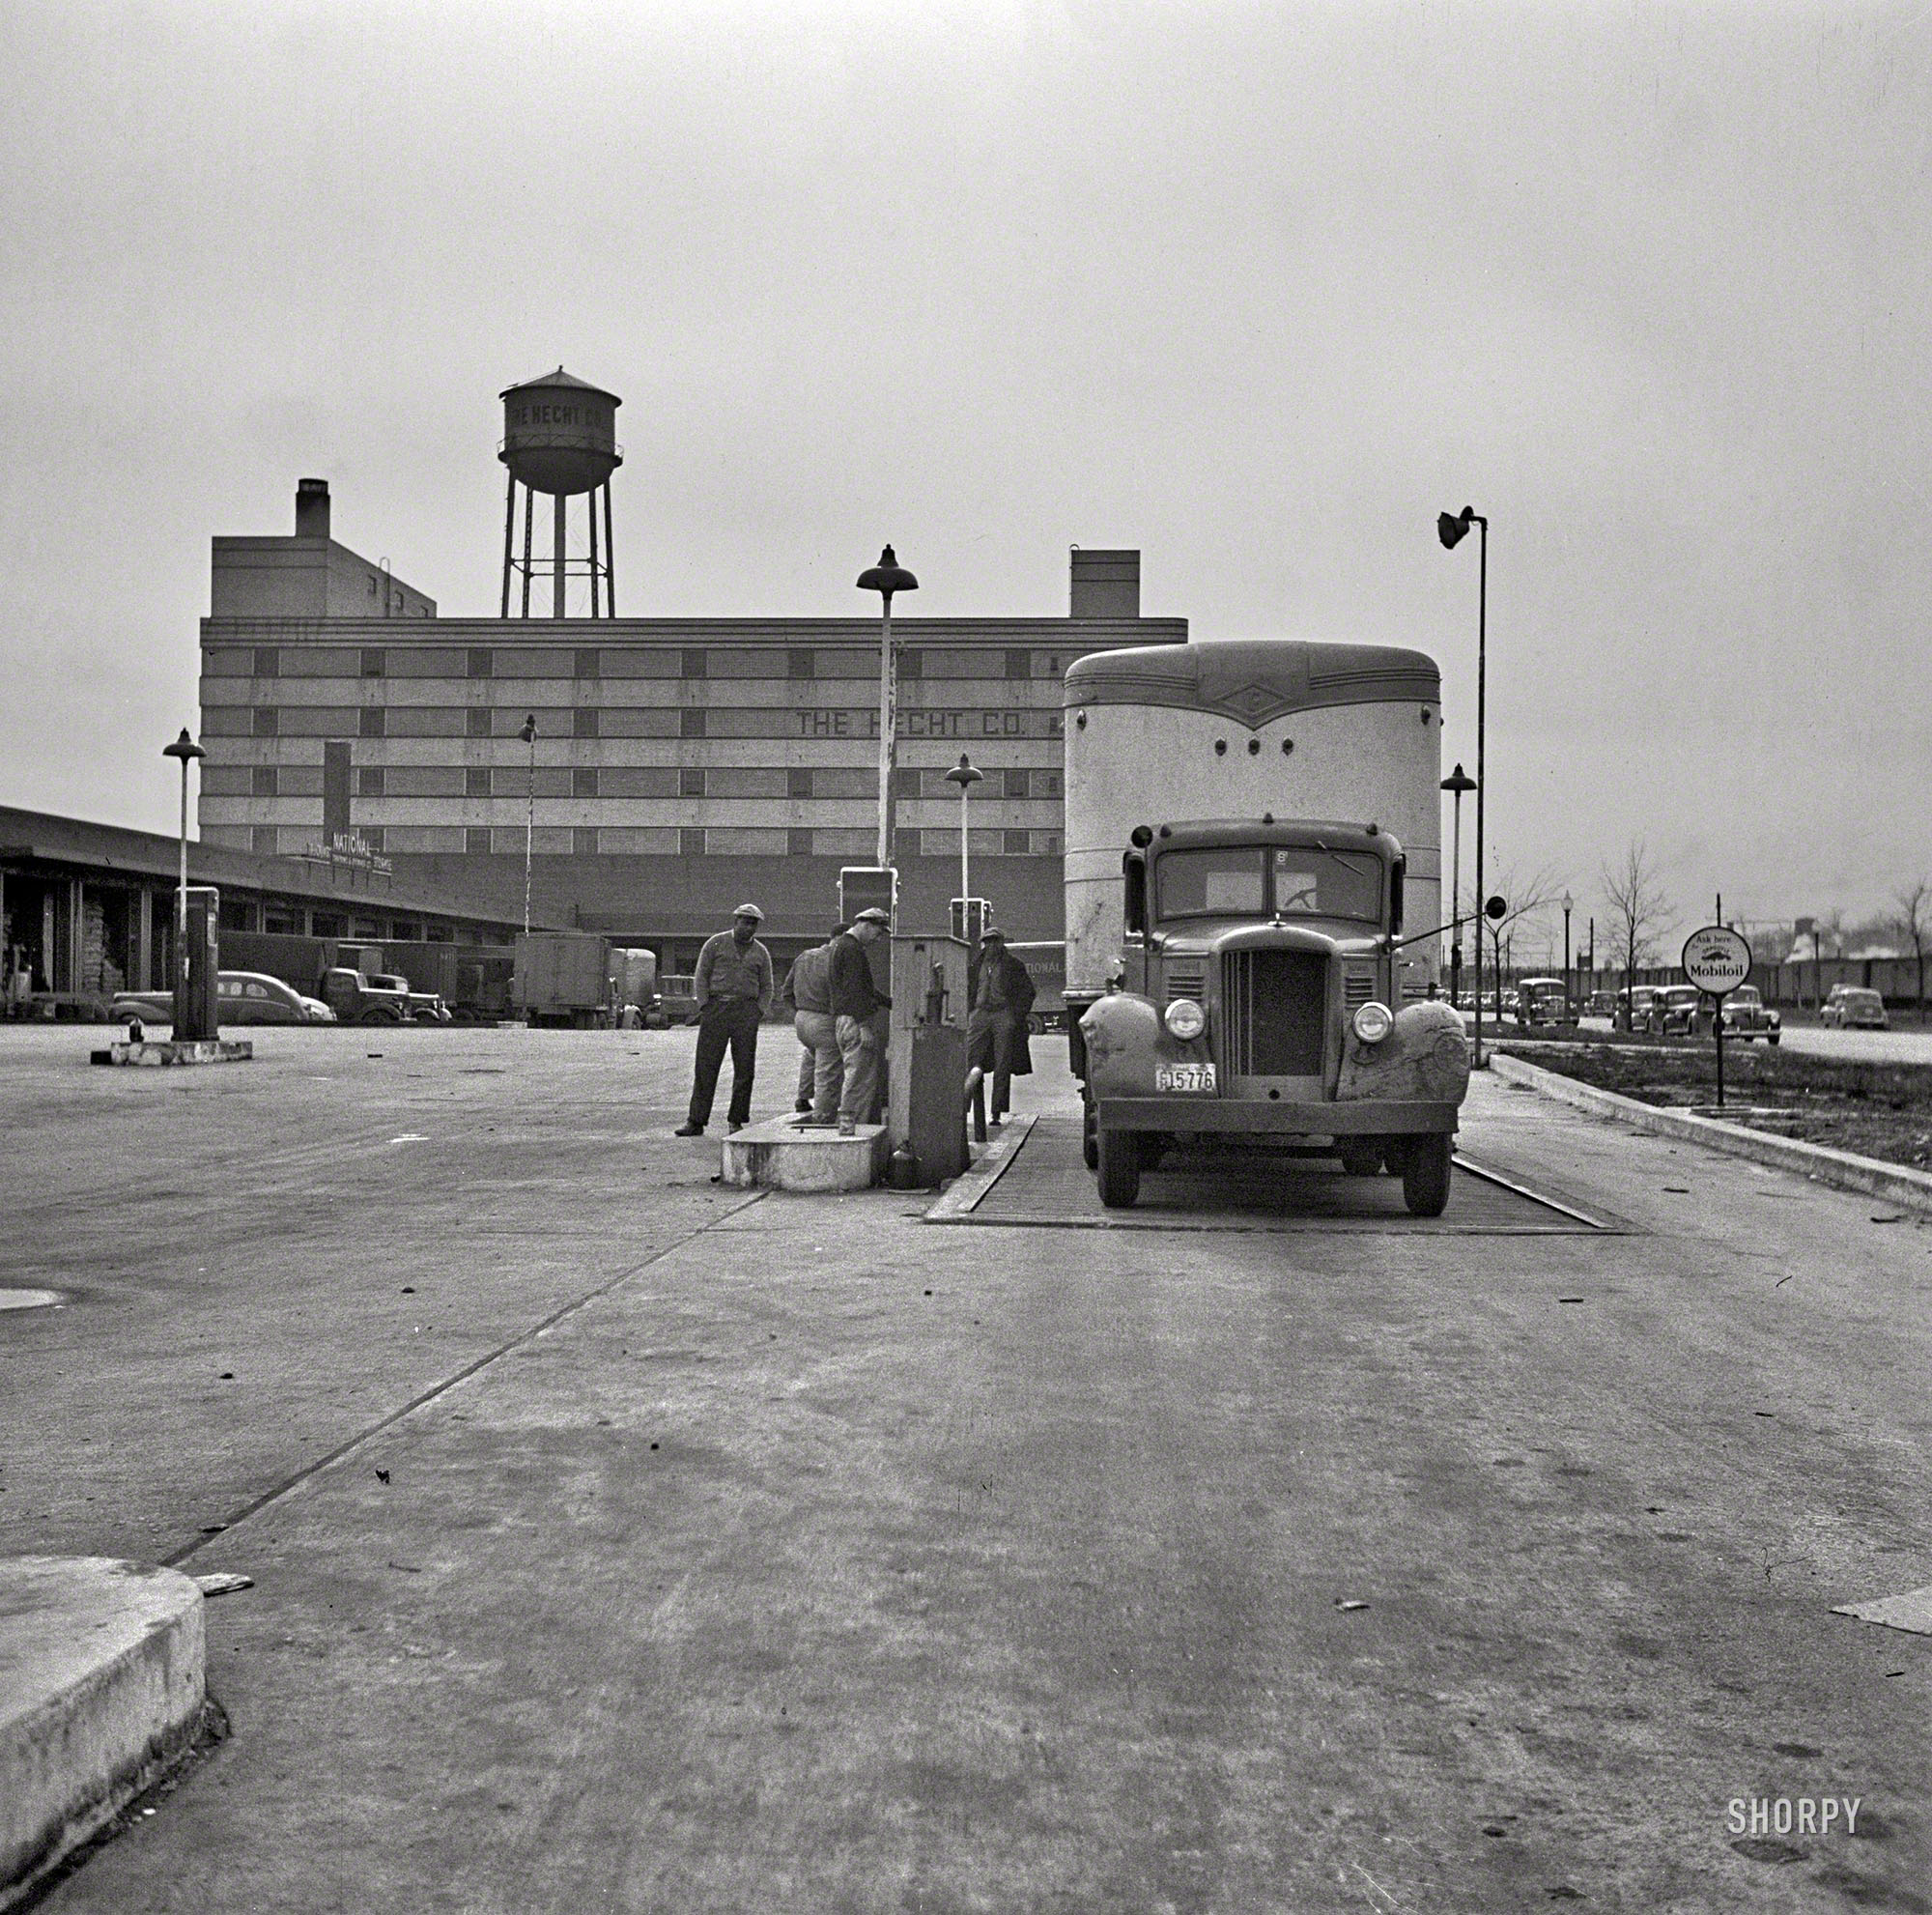 March 1943. "Transport refueling at Hecht Co. warehouse on New York Avenue in Washington, D.C." As opposed to Washington Street in New York, the venue of the previous post, also shot by John Vachon for the OWI. View full size.